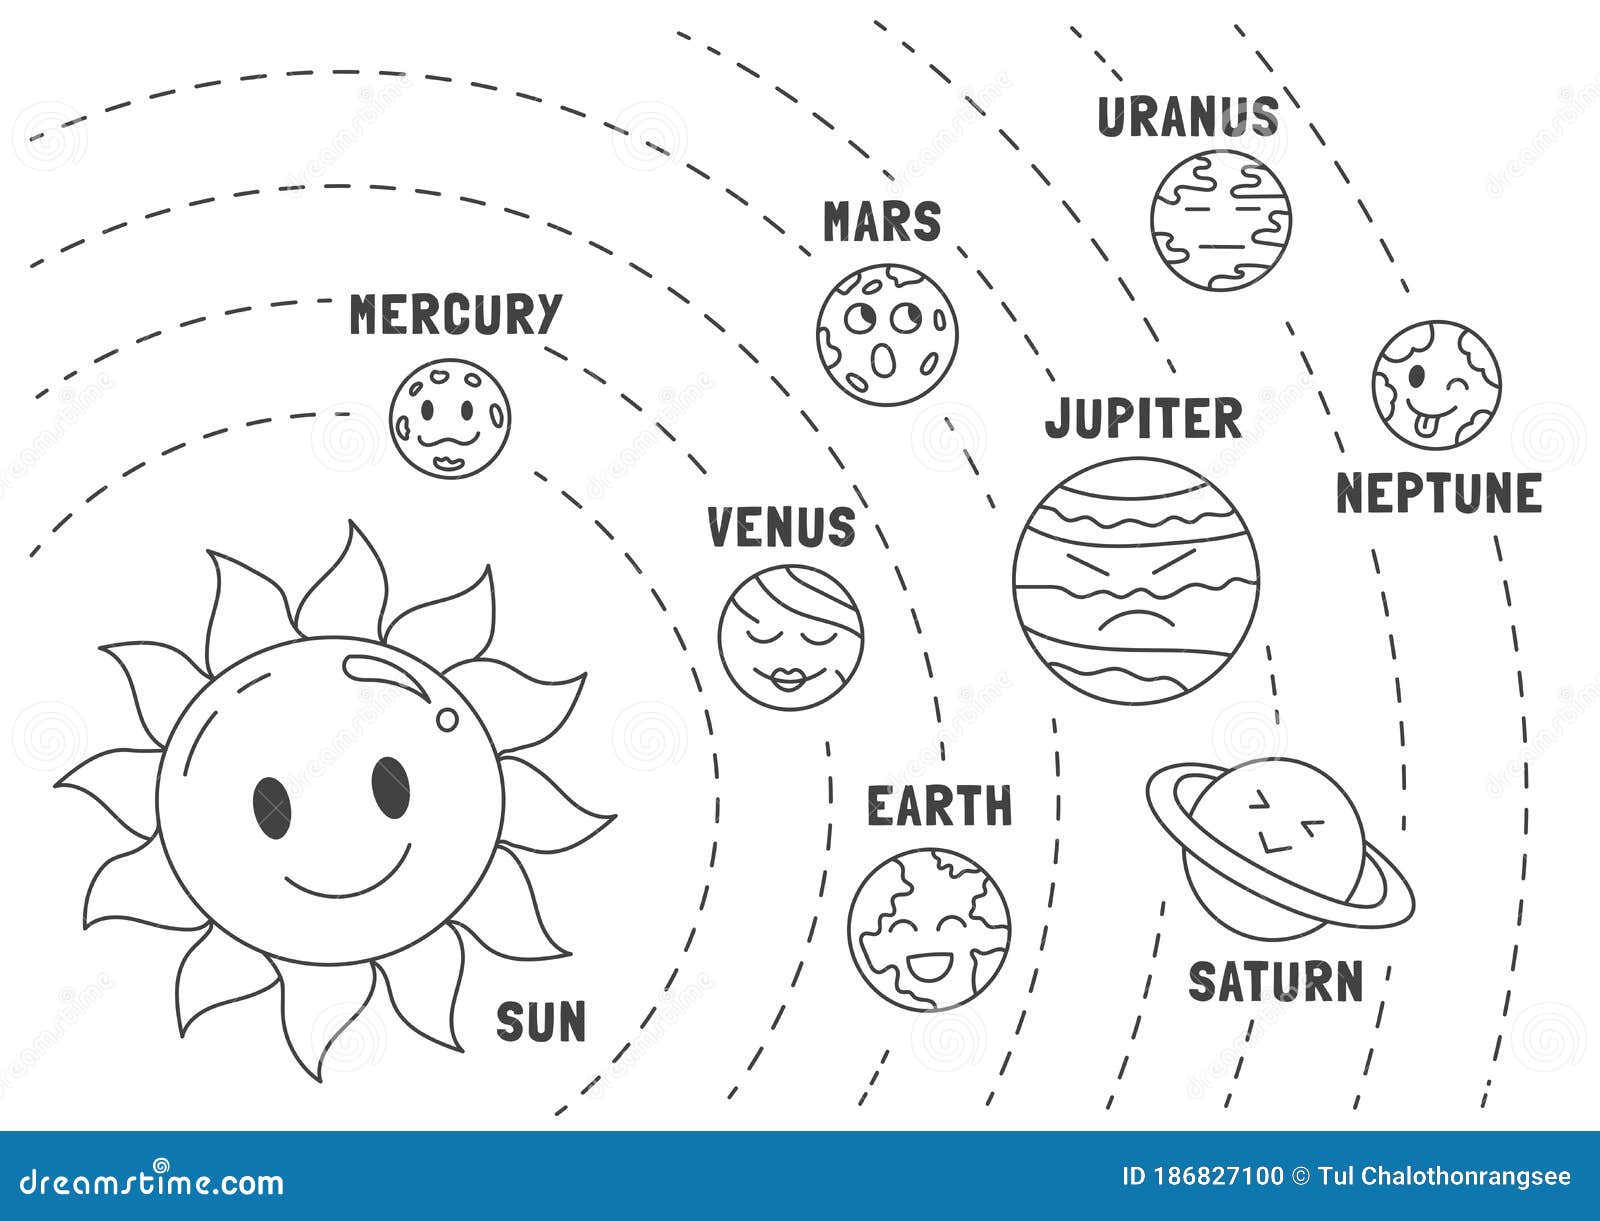 How to draw Solar system planets - labelled science diagram